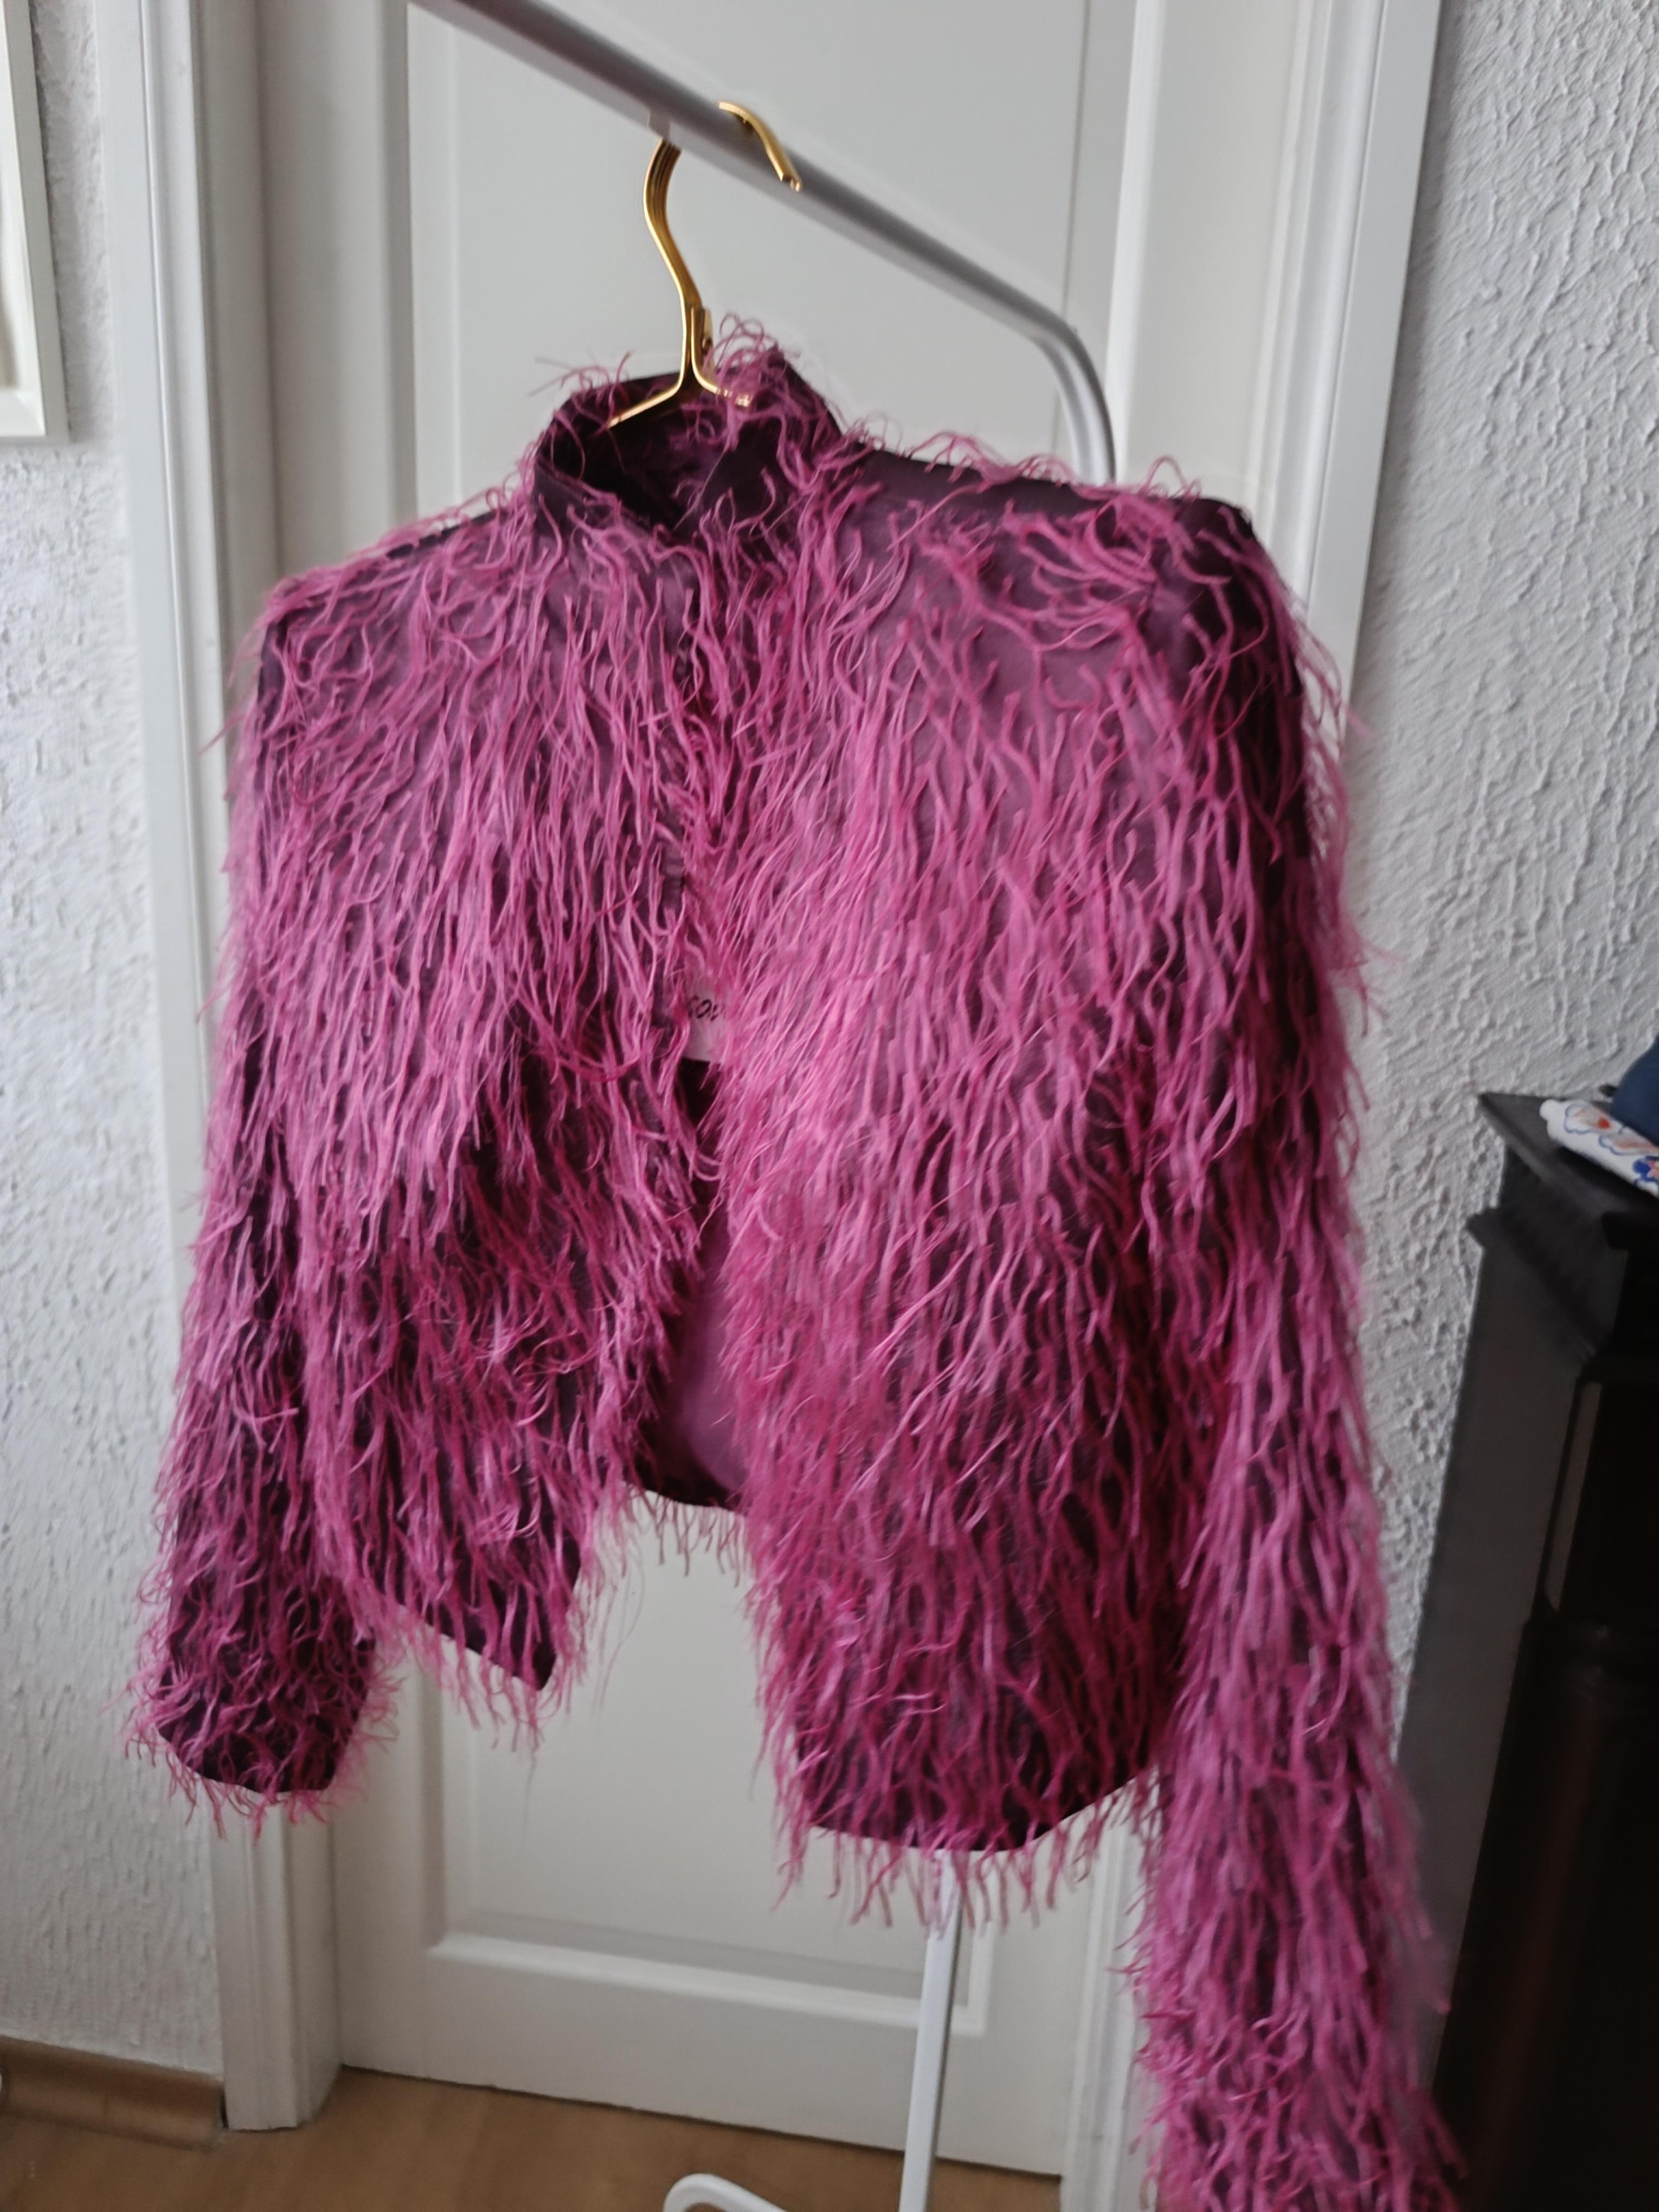 Yves Saint Laurent YSL 2000 Fuchsia Shaggy Faux Fur Cropped Jacket  Collection:  In Excellent Condition For Sale In Алматинский Почтамт, KZ